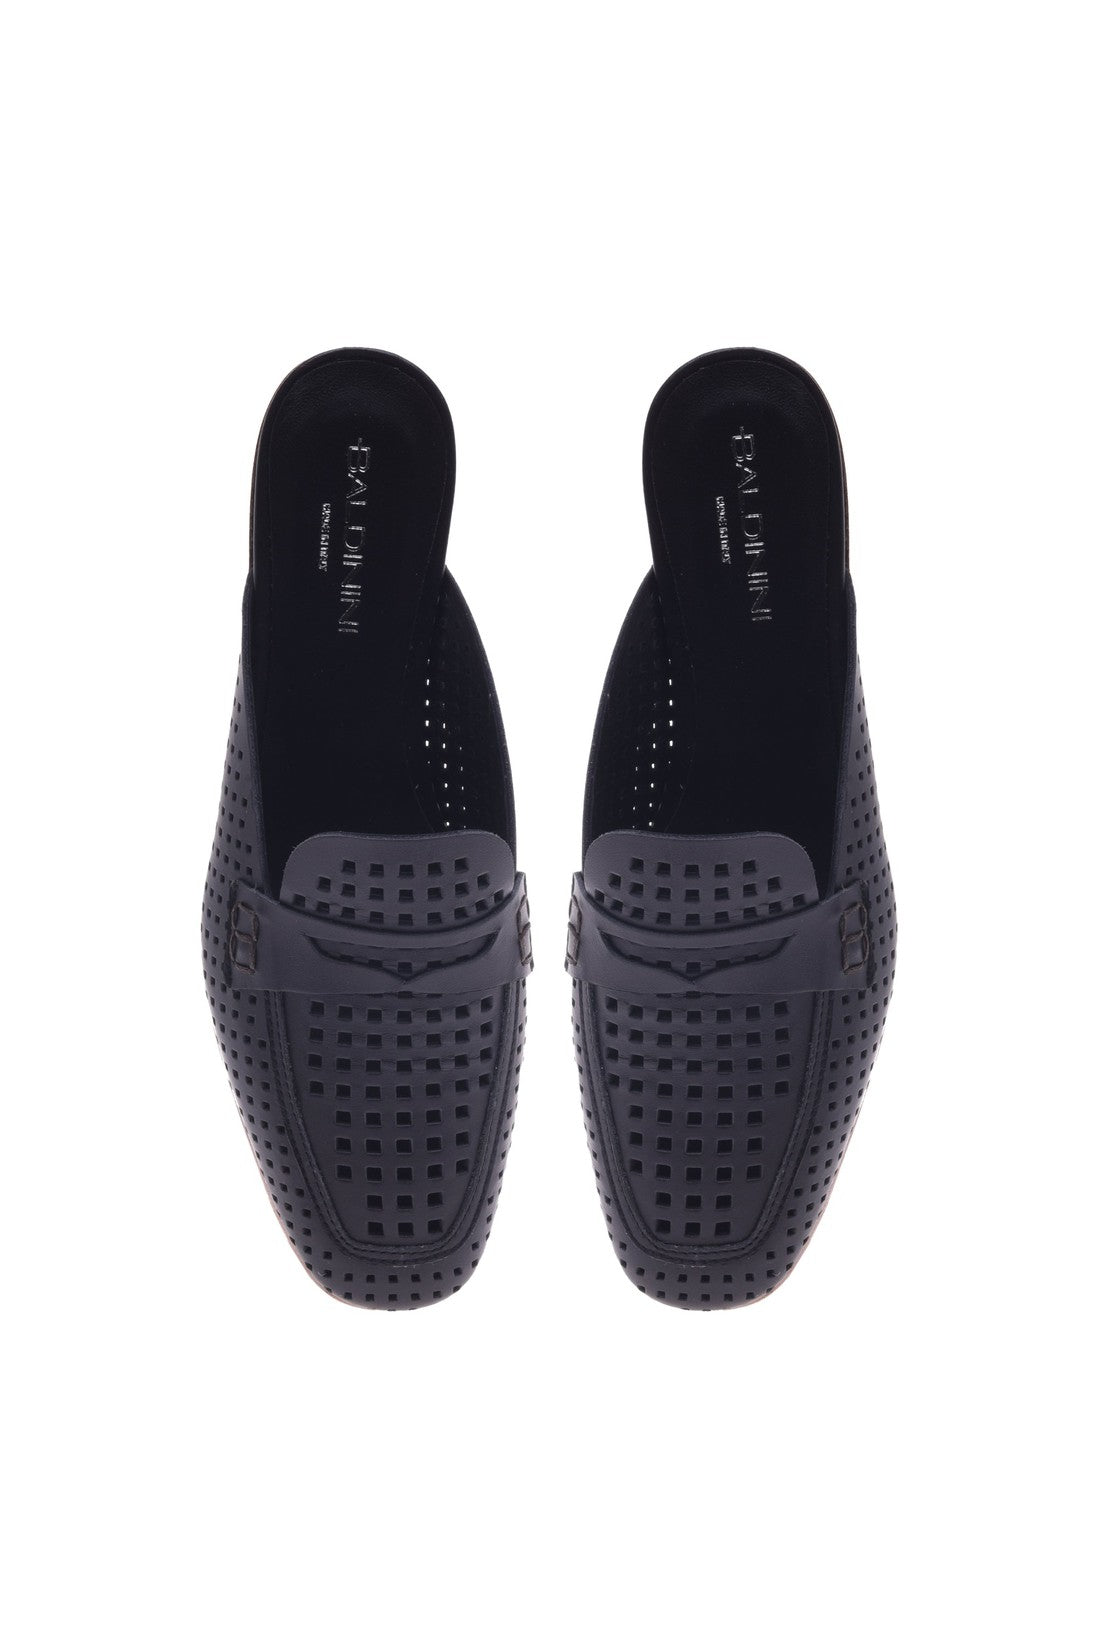 Loafer in black perforated calfskin